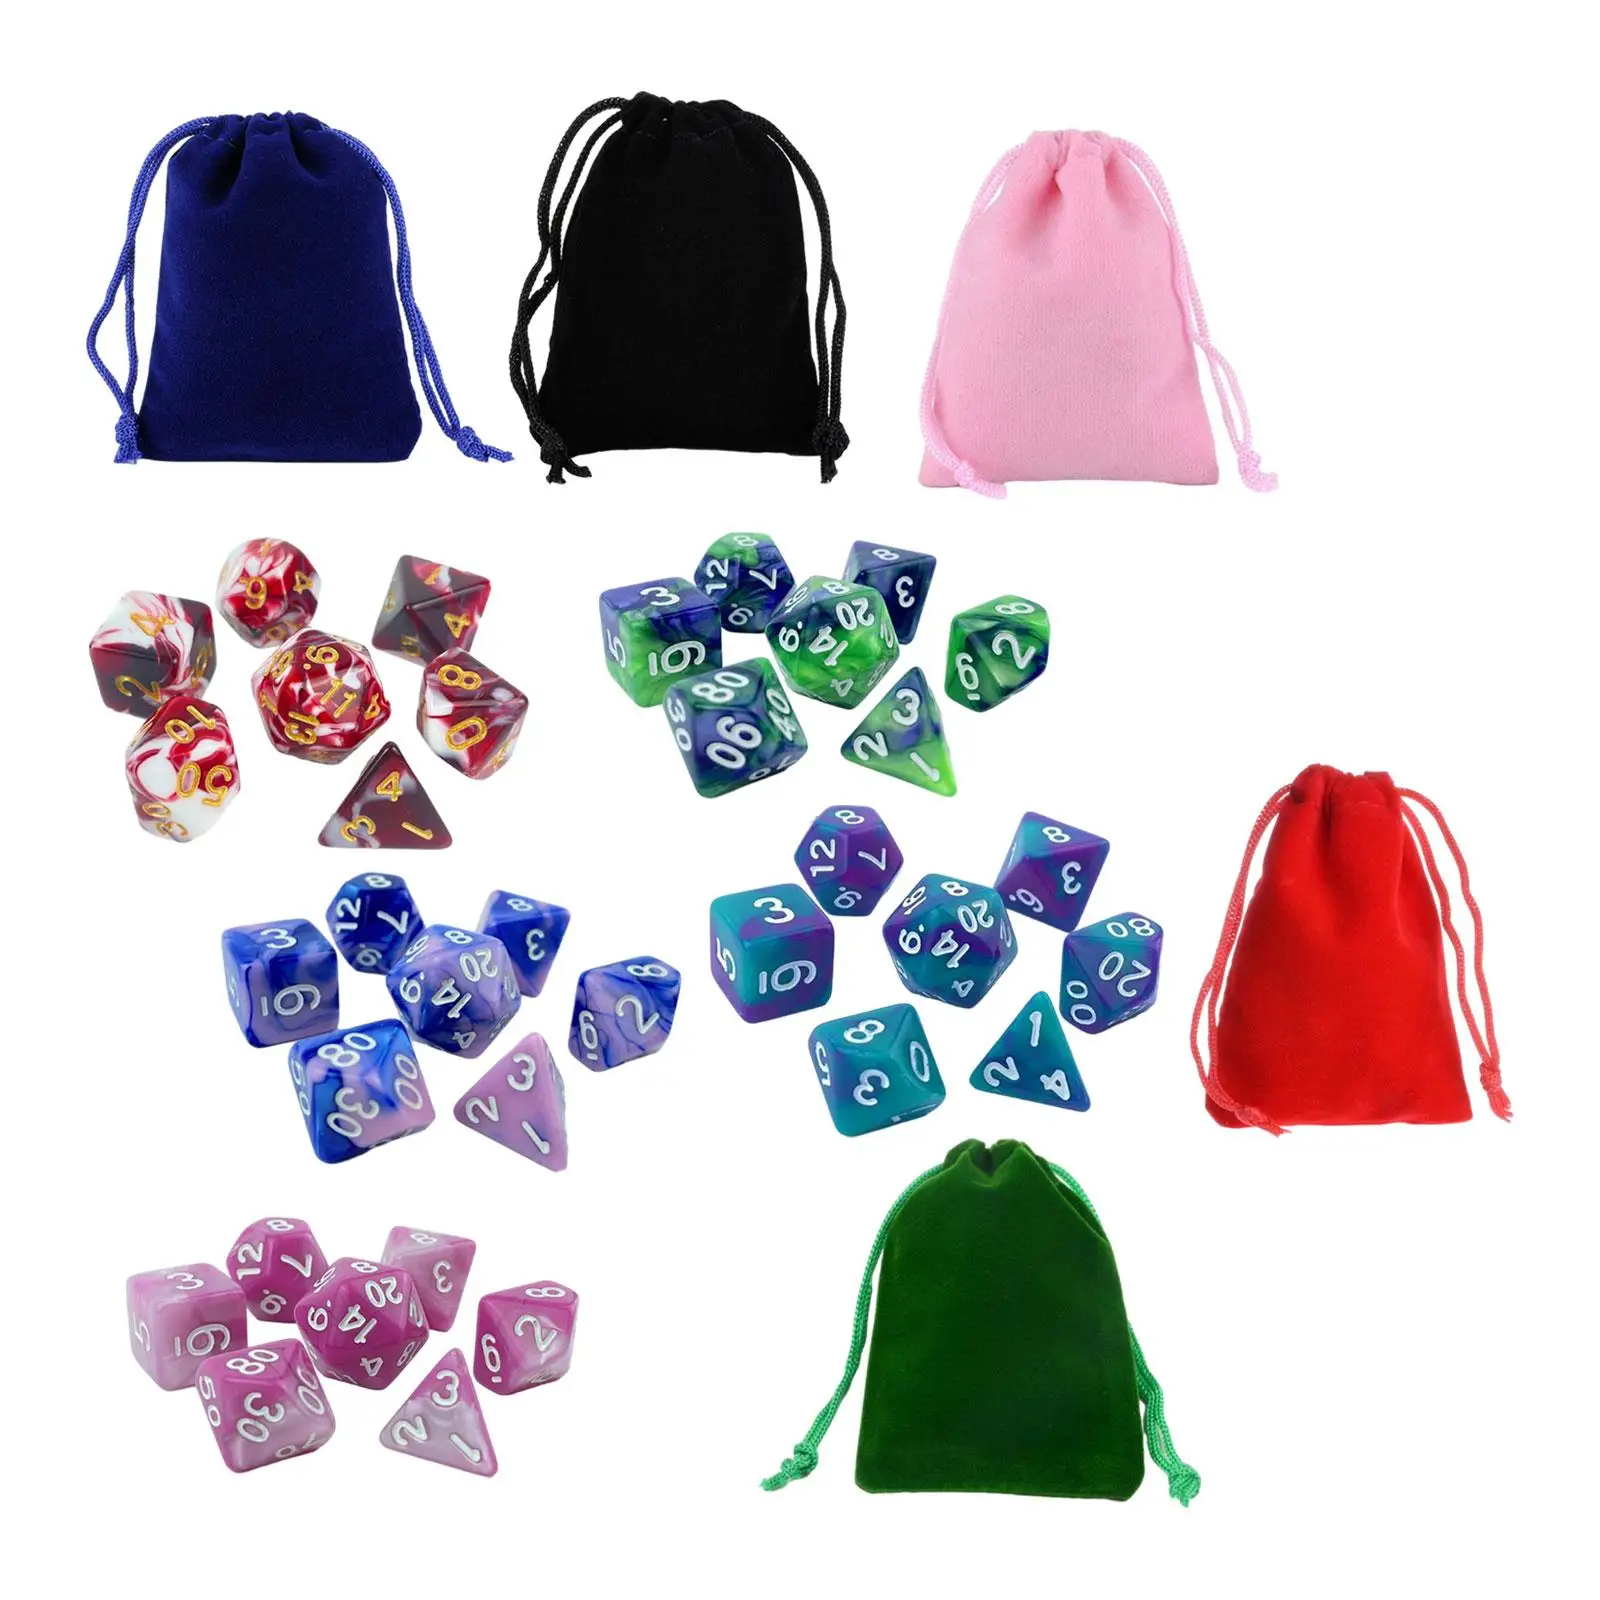 35Pcs Polyhedral Dices with Storage Bags Dice Games Set Table Game for Family Gathering Cafe Party Favors Entertainment